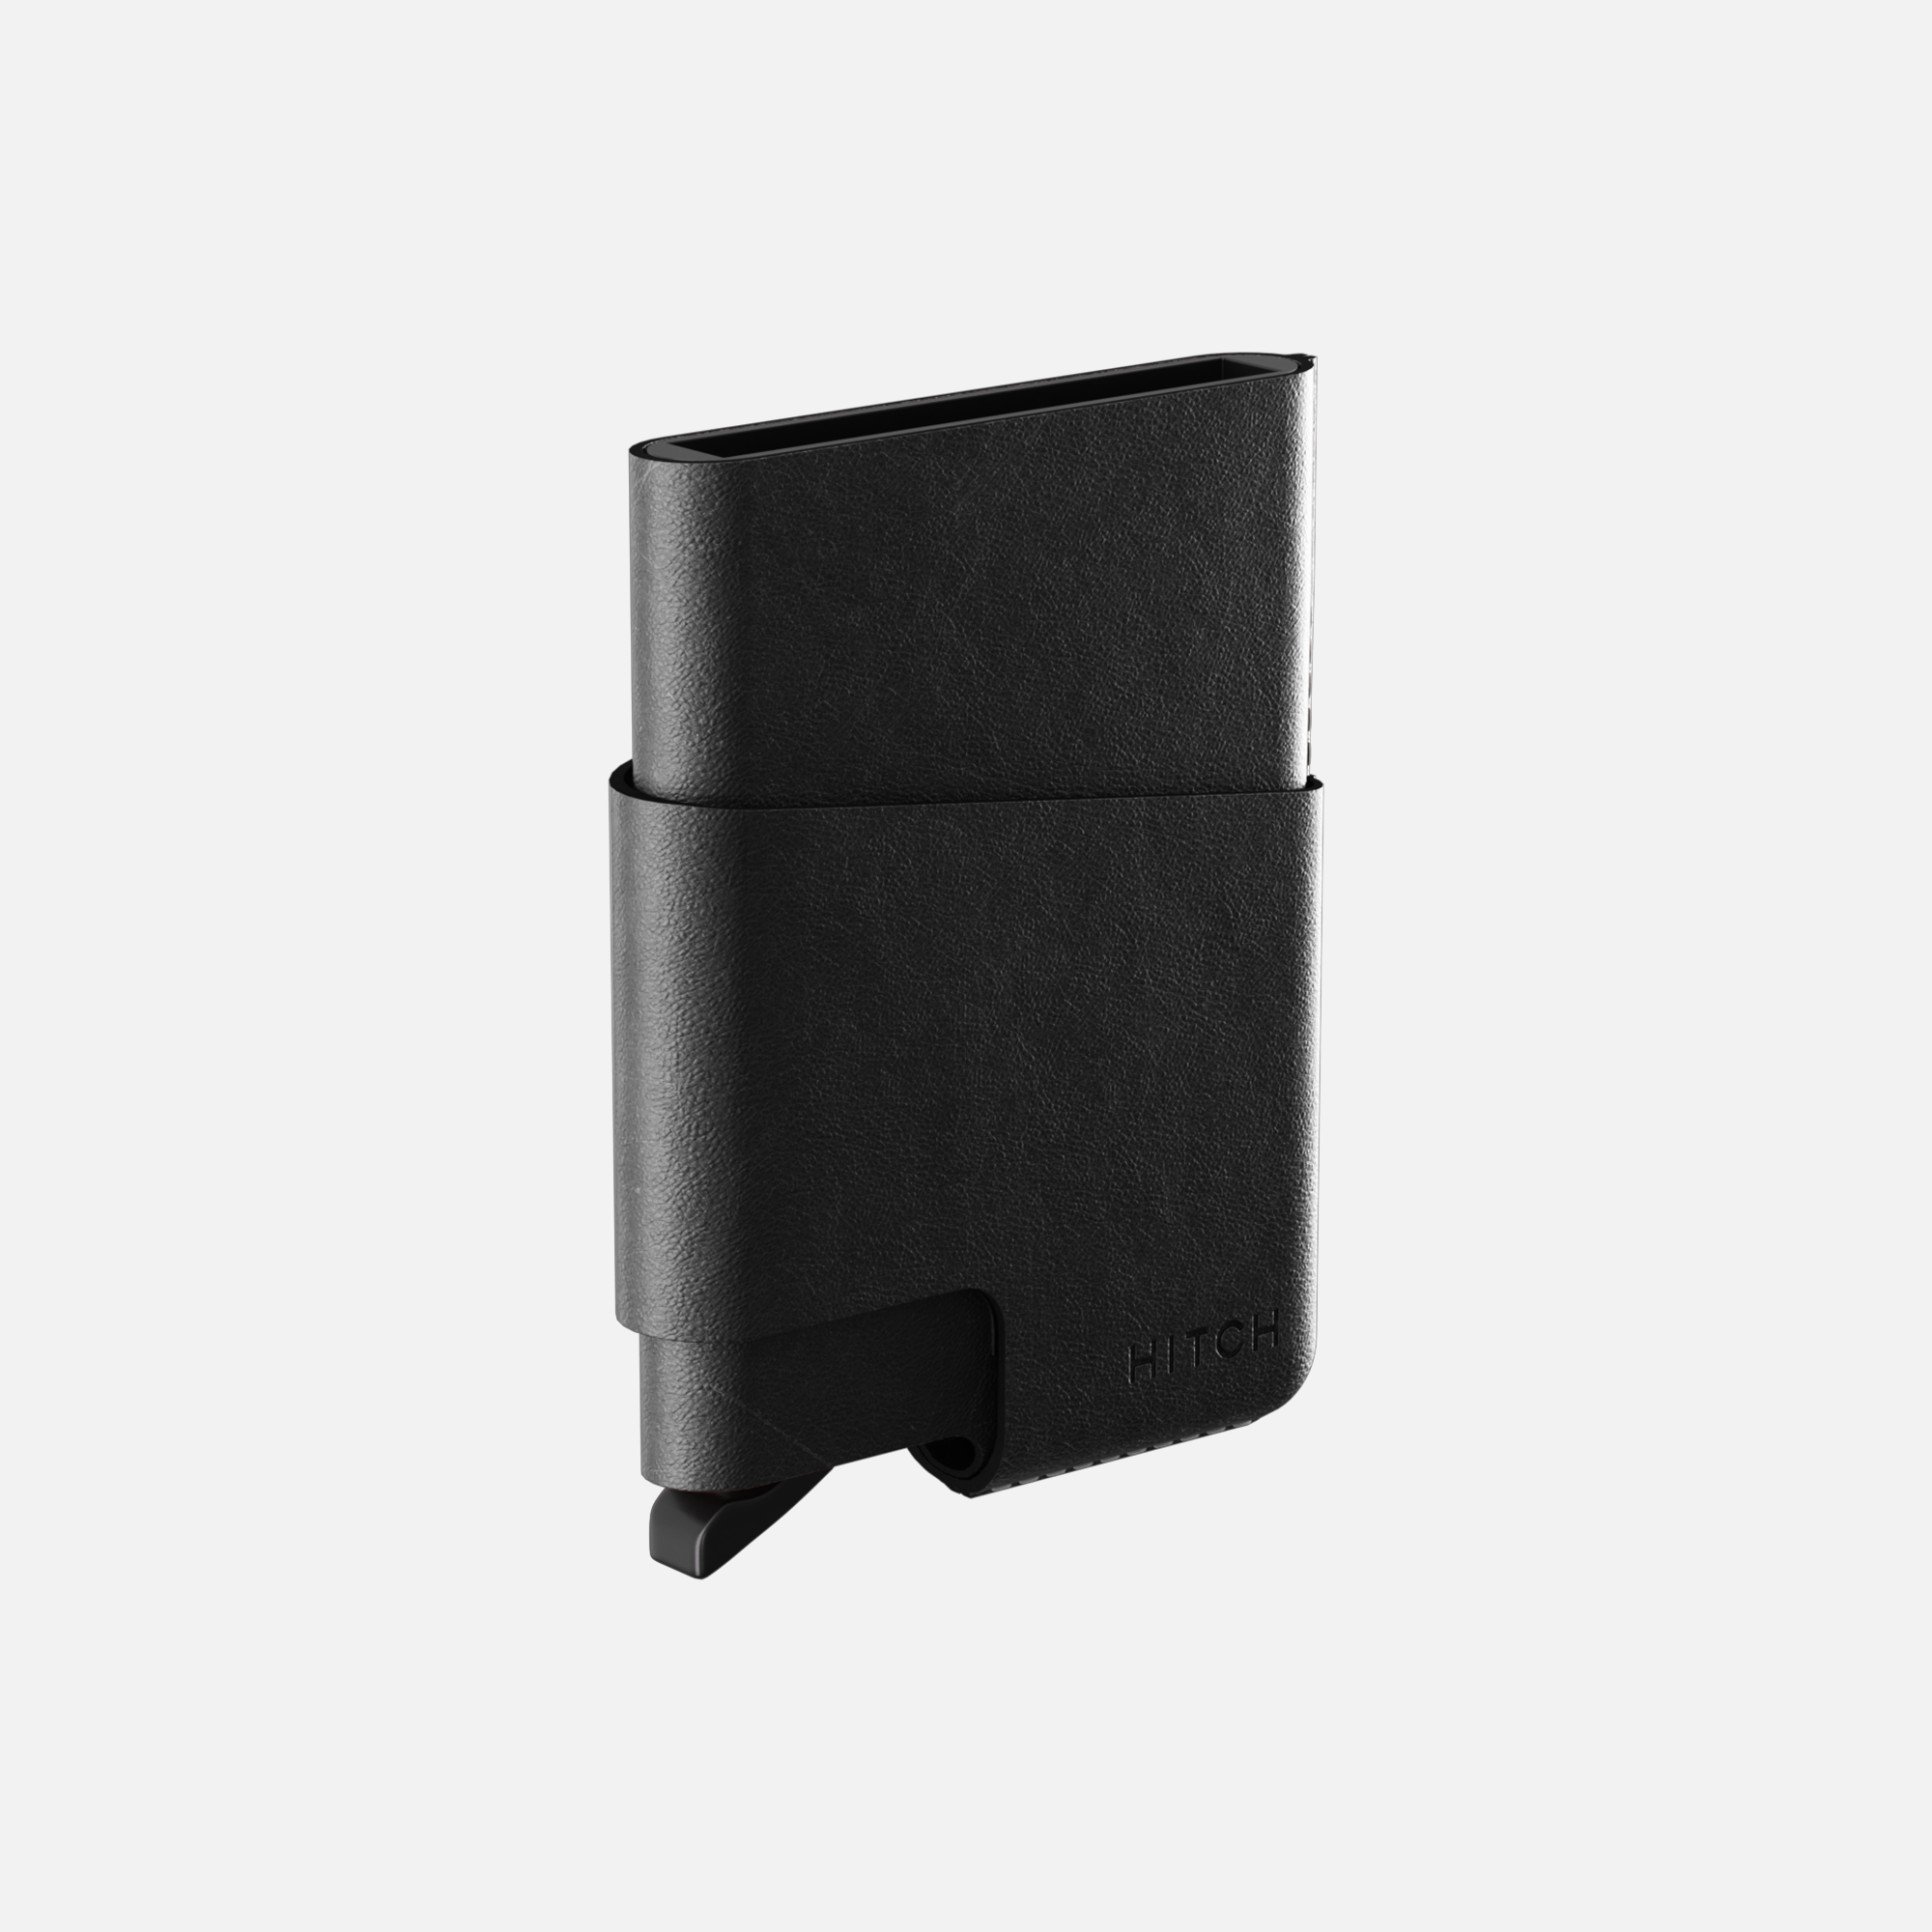 CUT-OUT Cardholder - RFID Block Featured - Handmade Natural Genuine Leather - Black